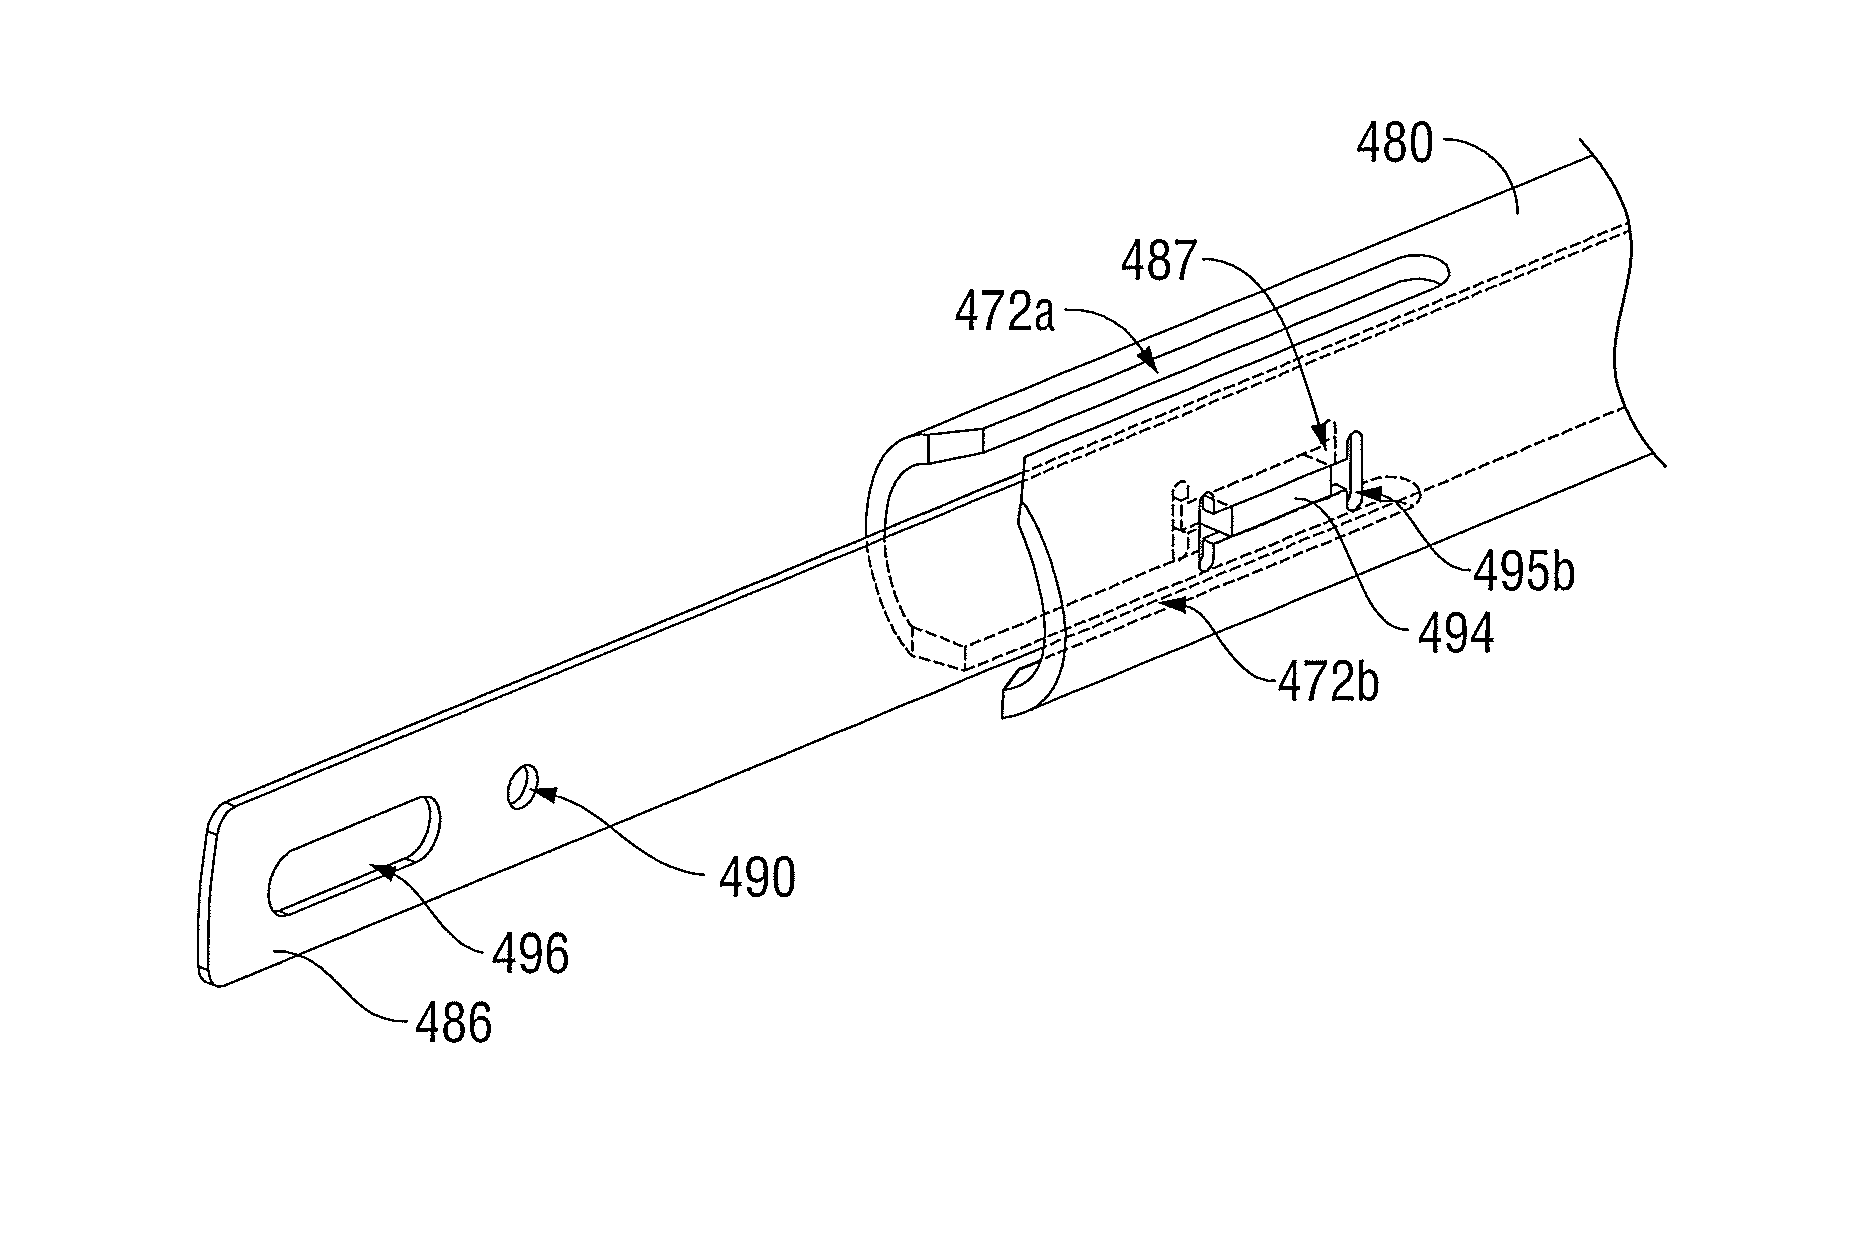 Simplified spring load mechanism for delivering shaft force of a surgical instrument